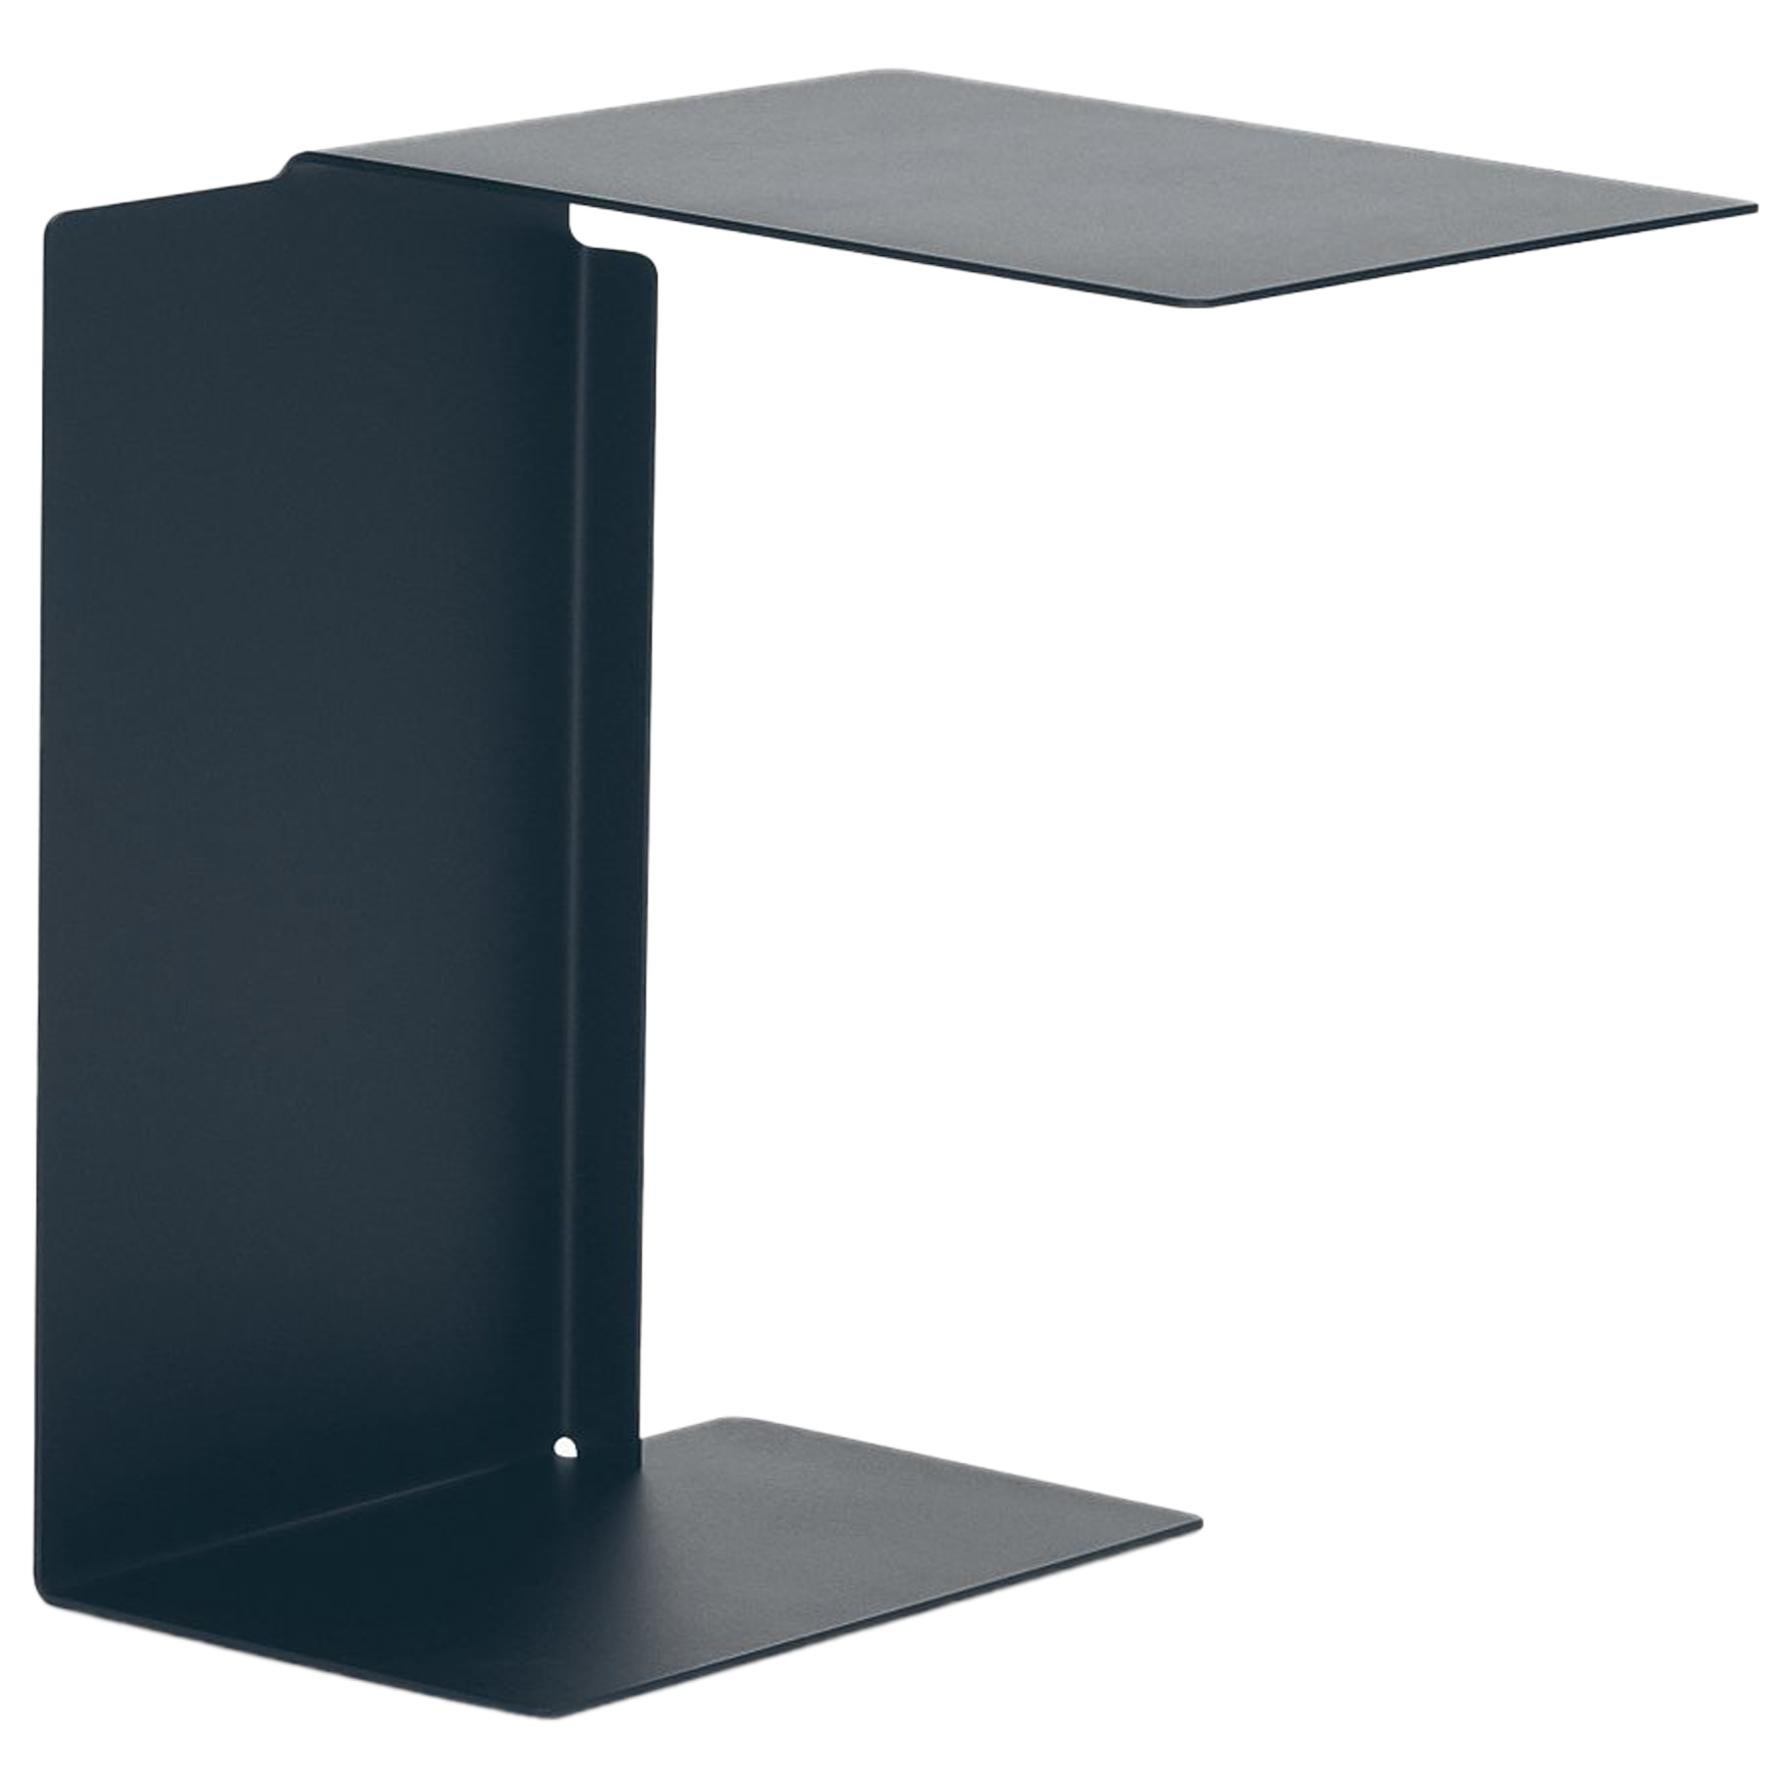 ClassiCon Diana B Side Table in Grey Blue by Konstantin Grcic